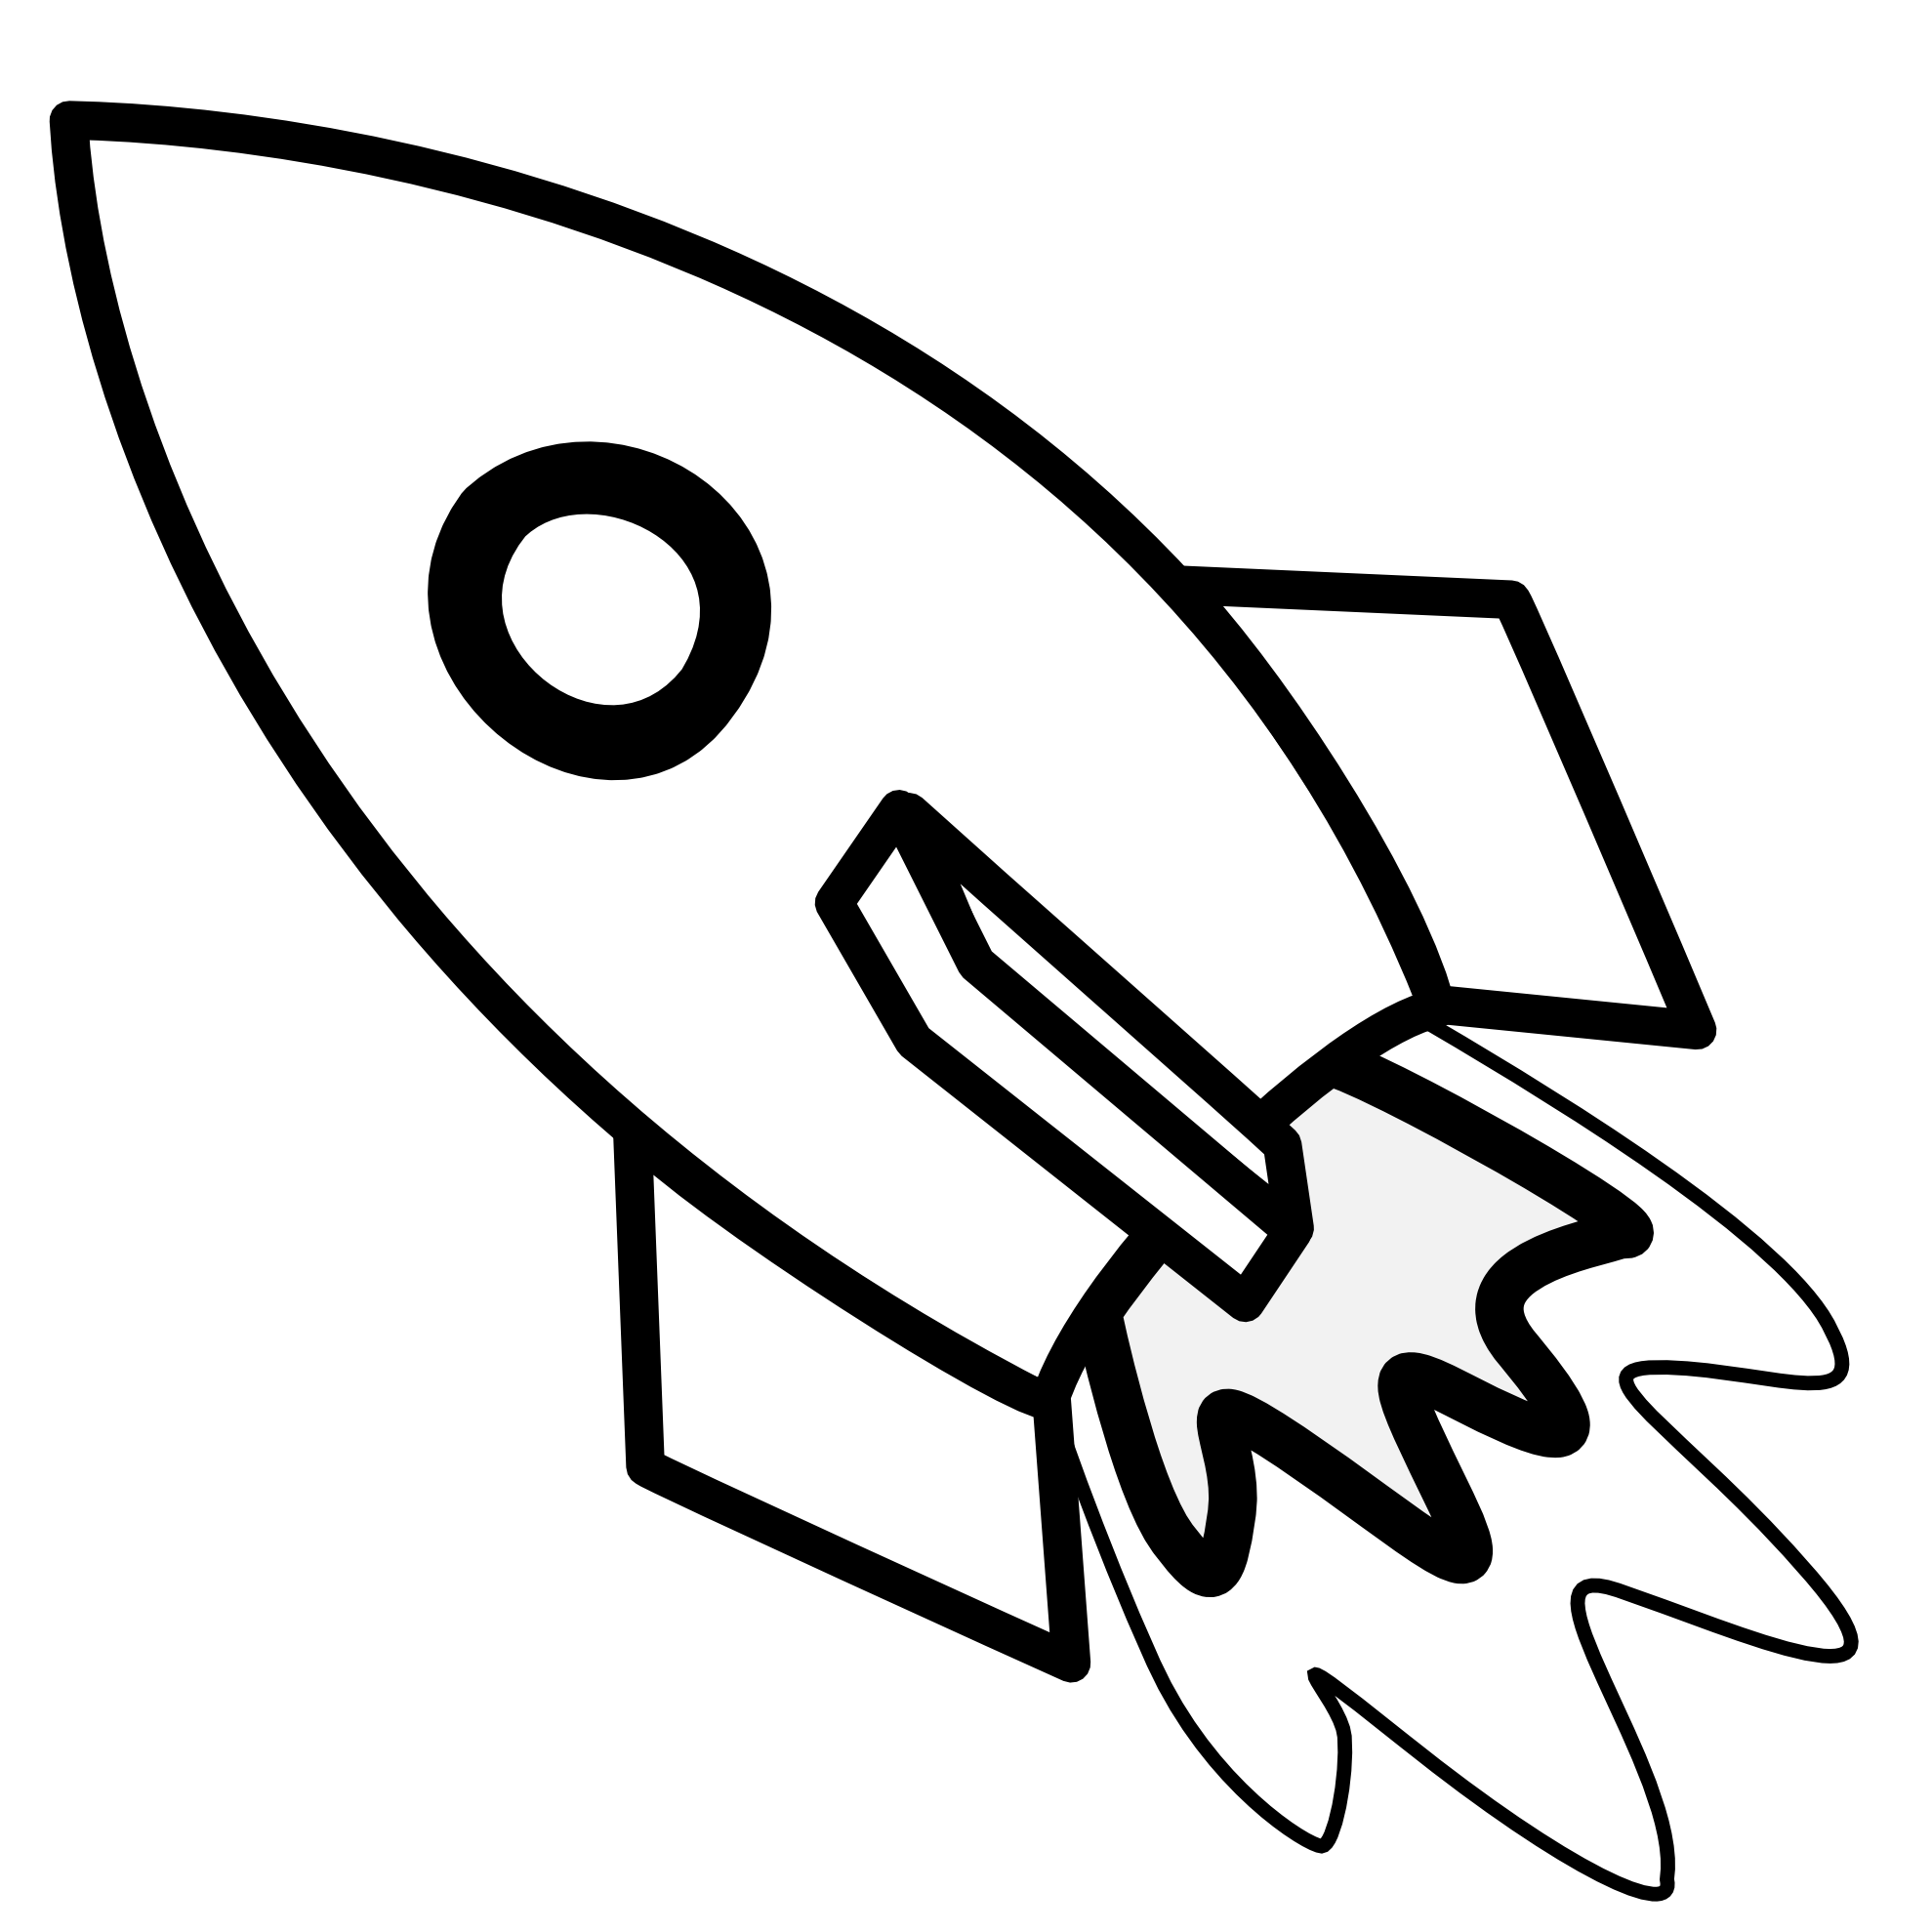 Rocketship clipart missile. Rocket ship coloring pages